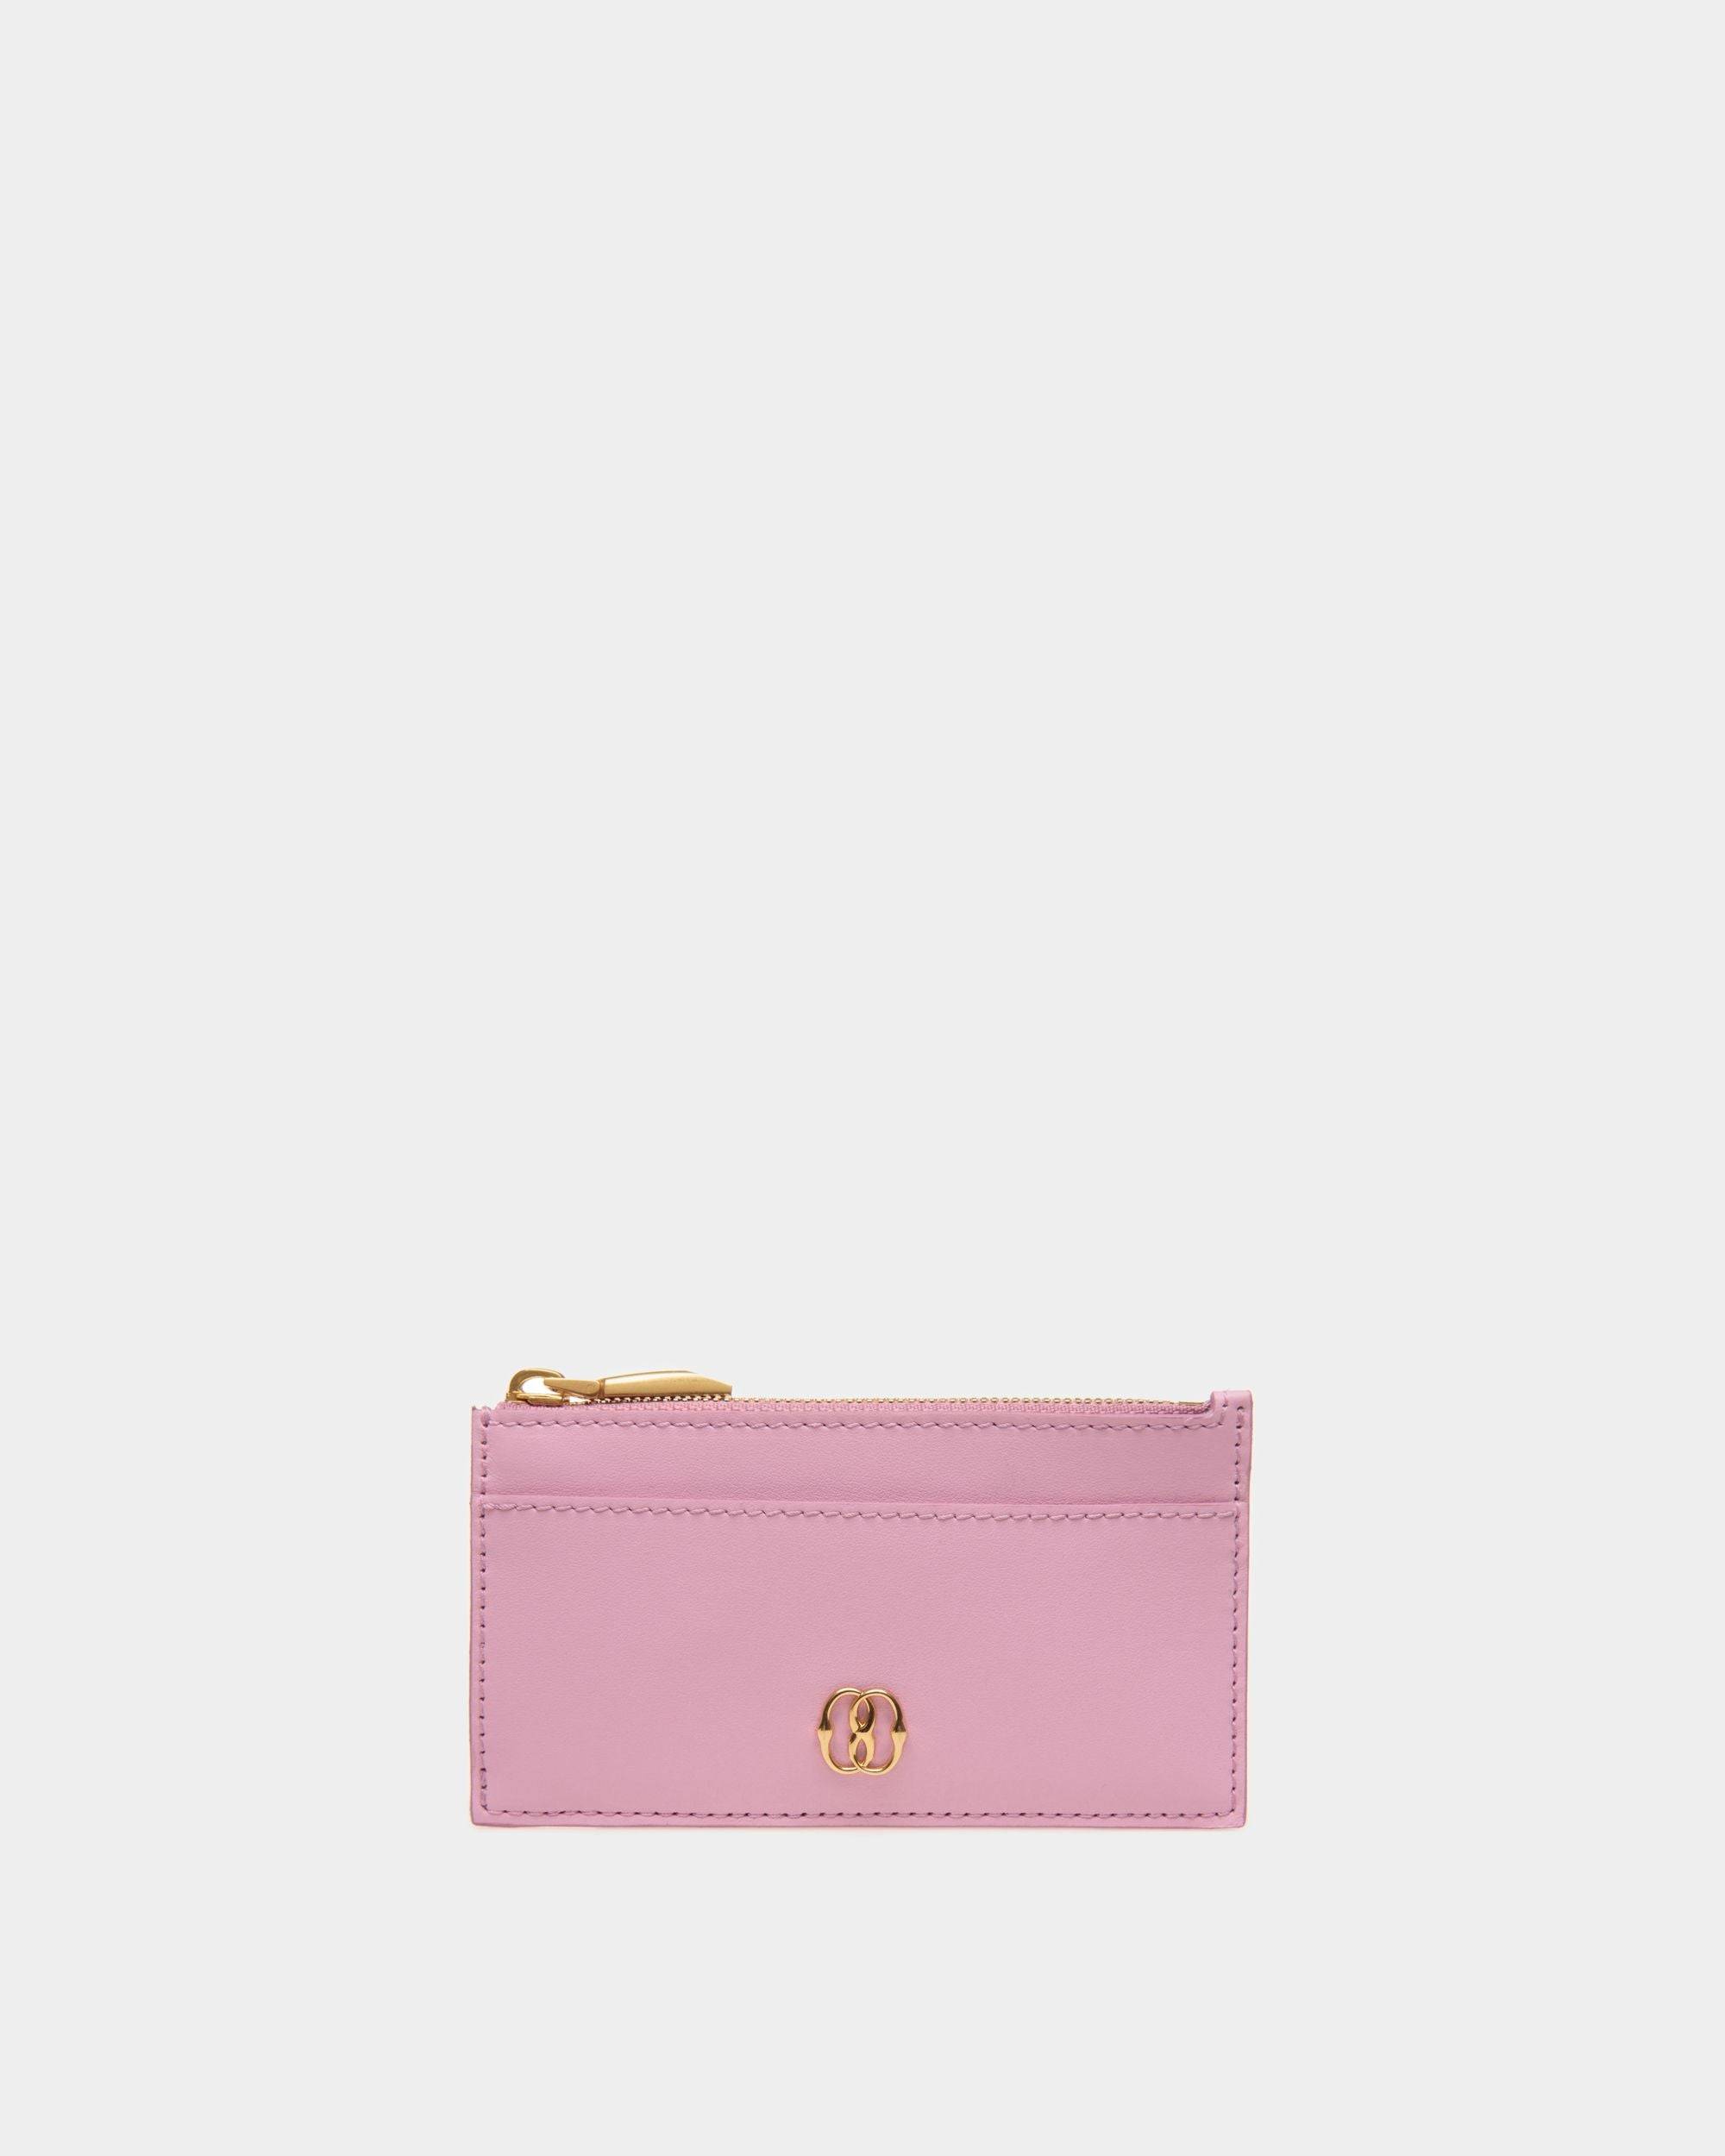 Women's Emblem Zipped Card Holder in Pink Leather | Bally | Still Life Front